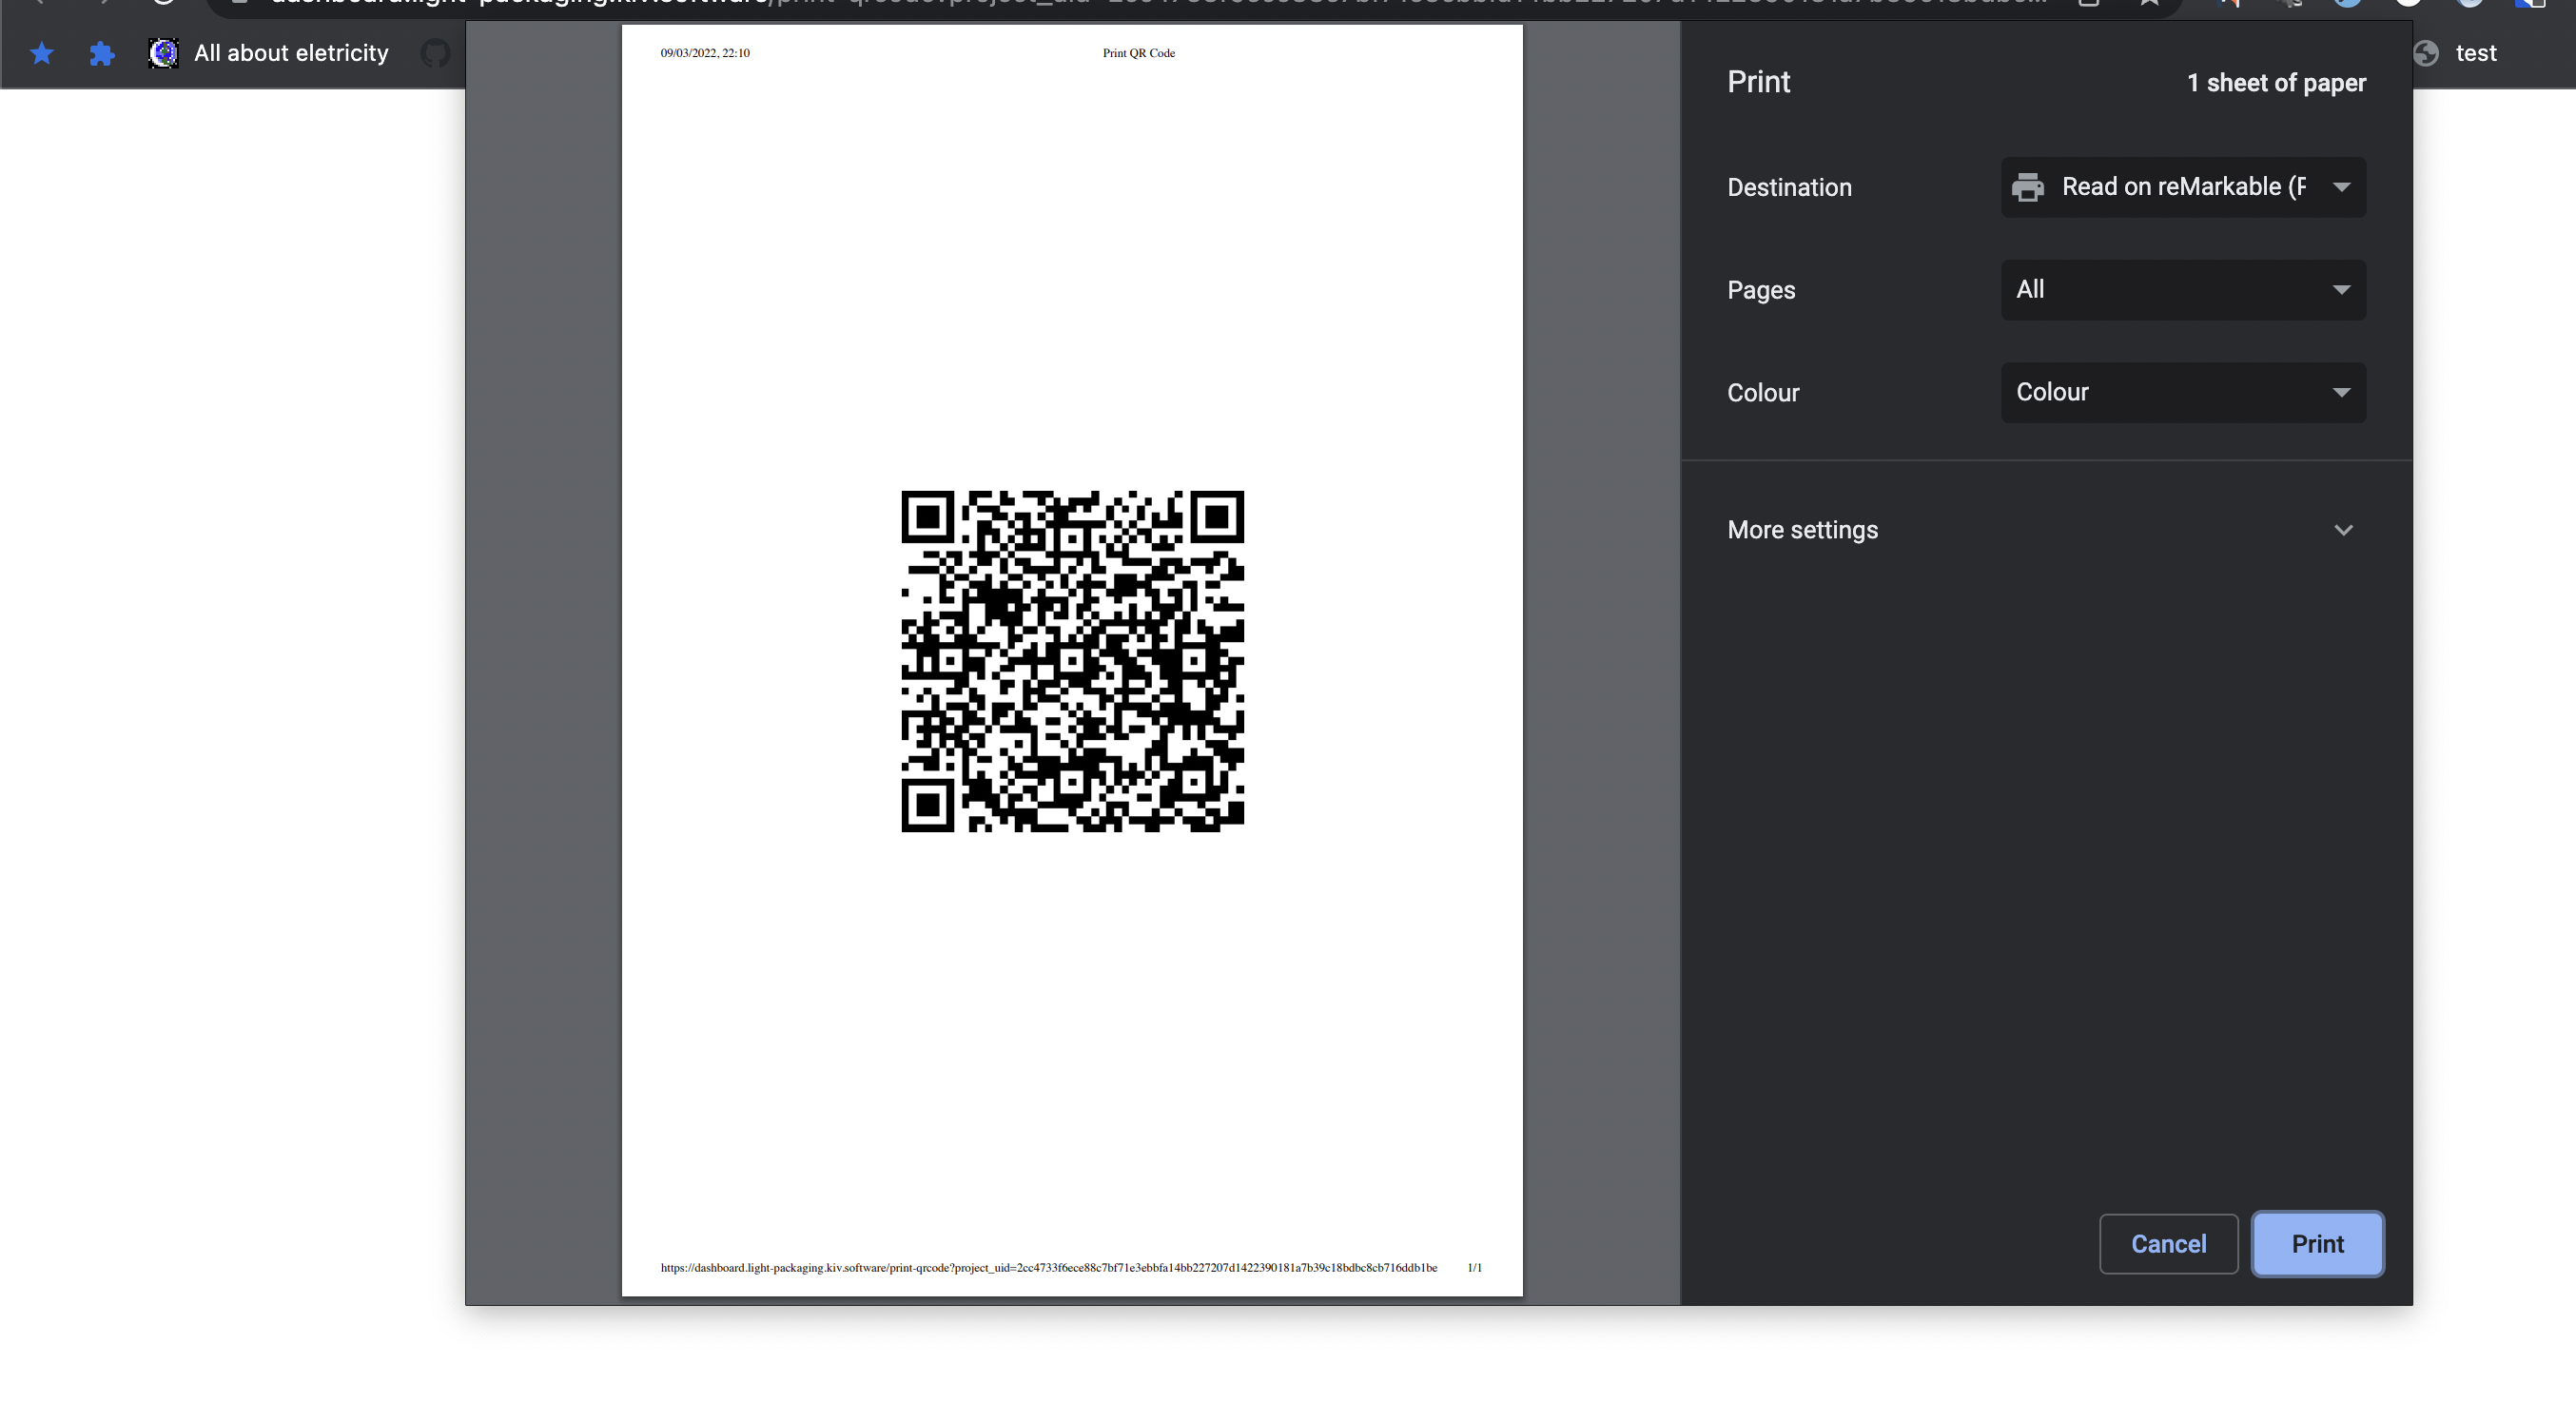 Printing the QR code